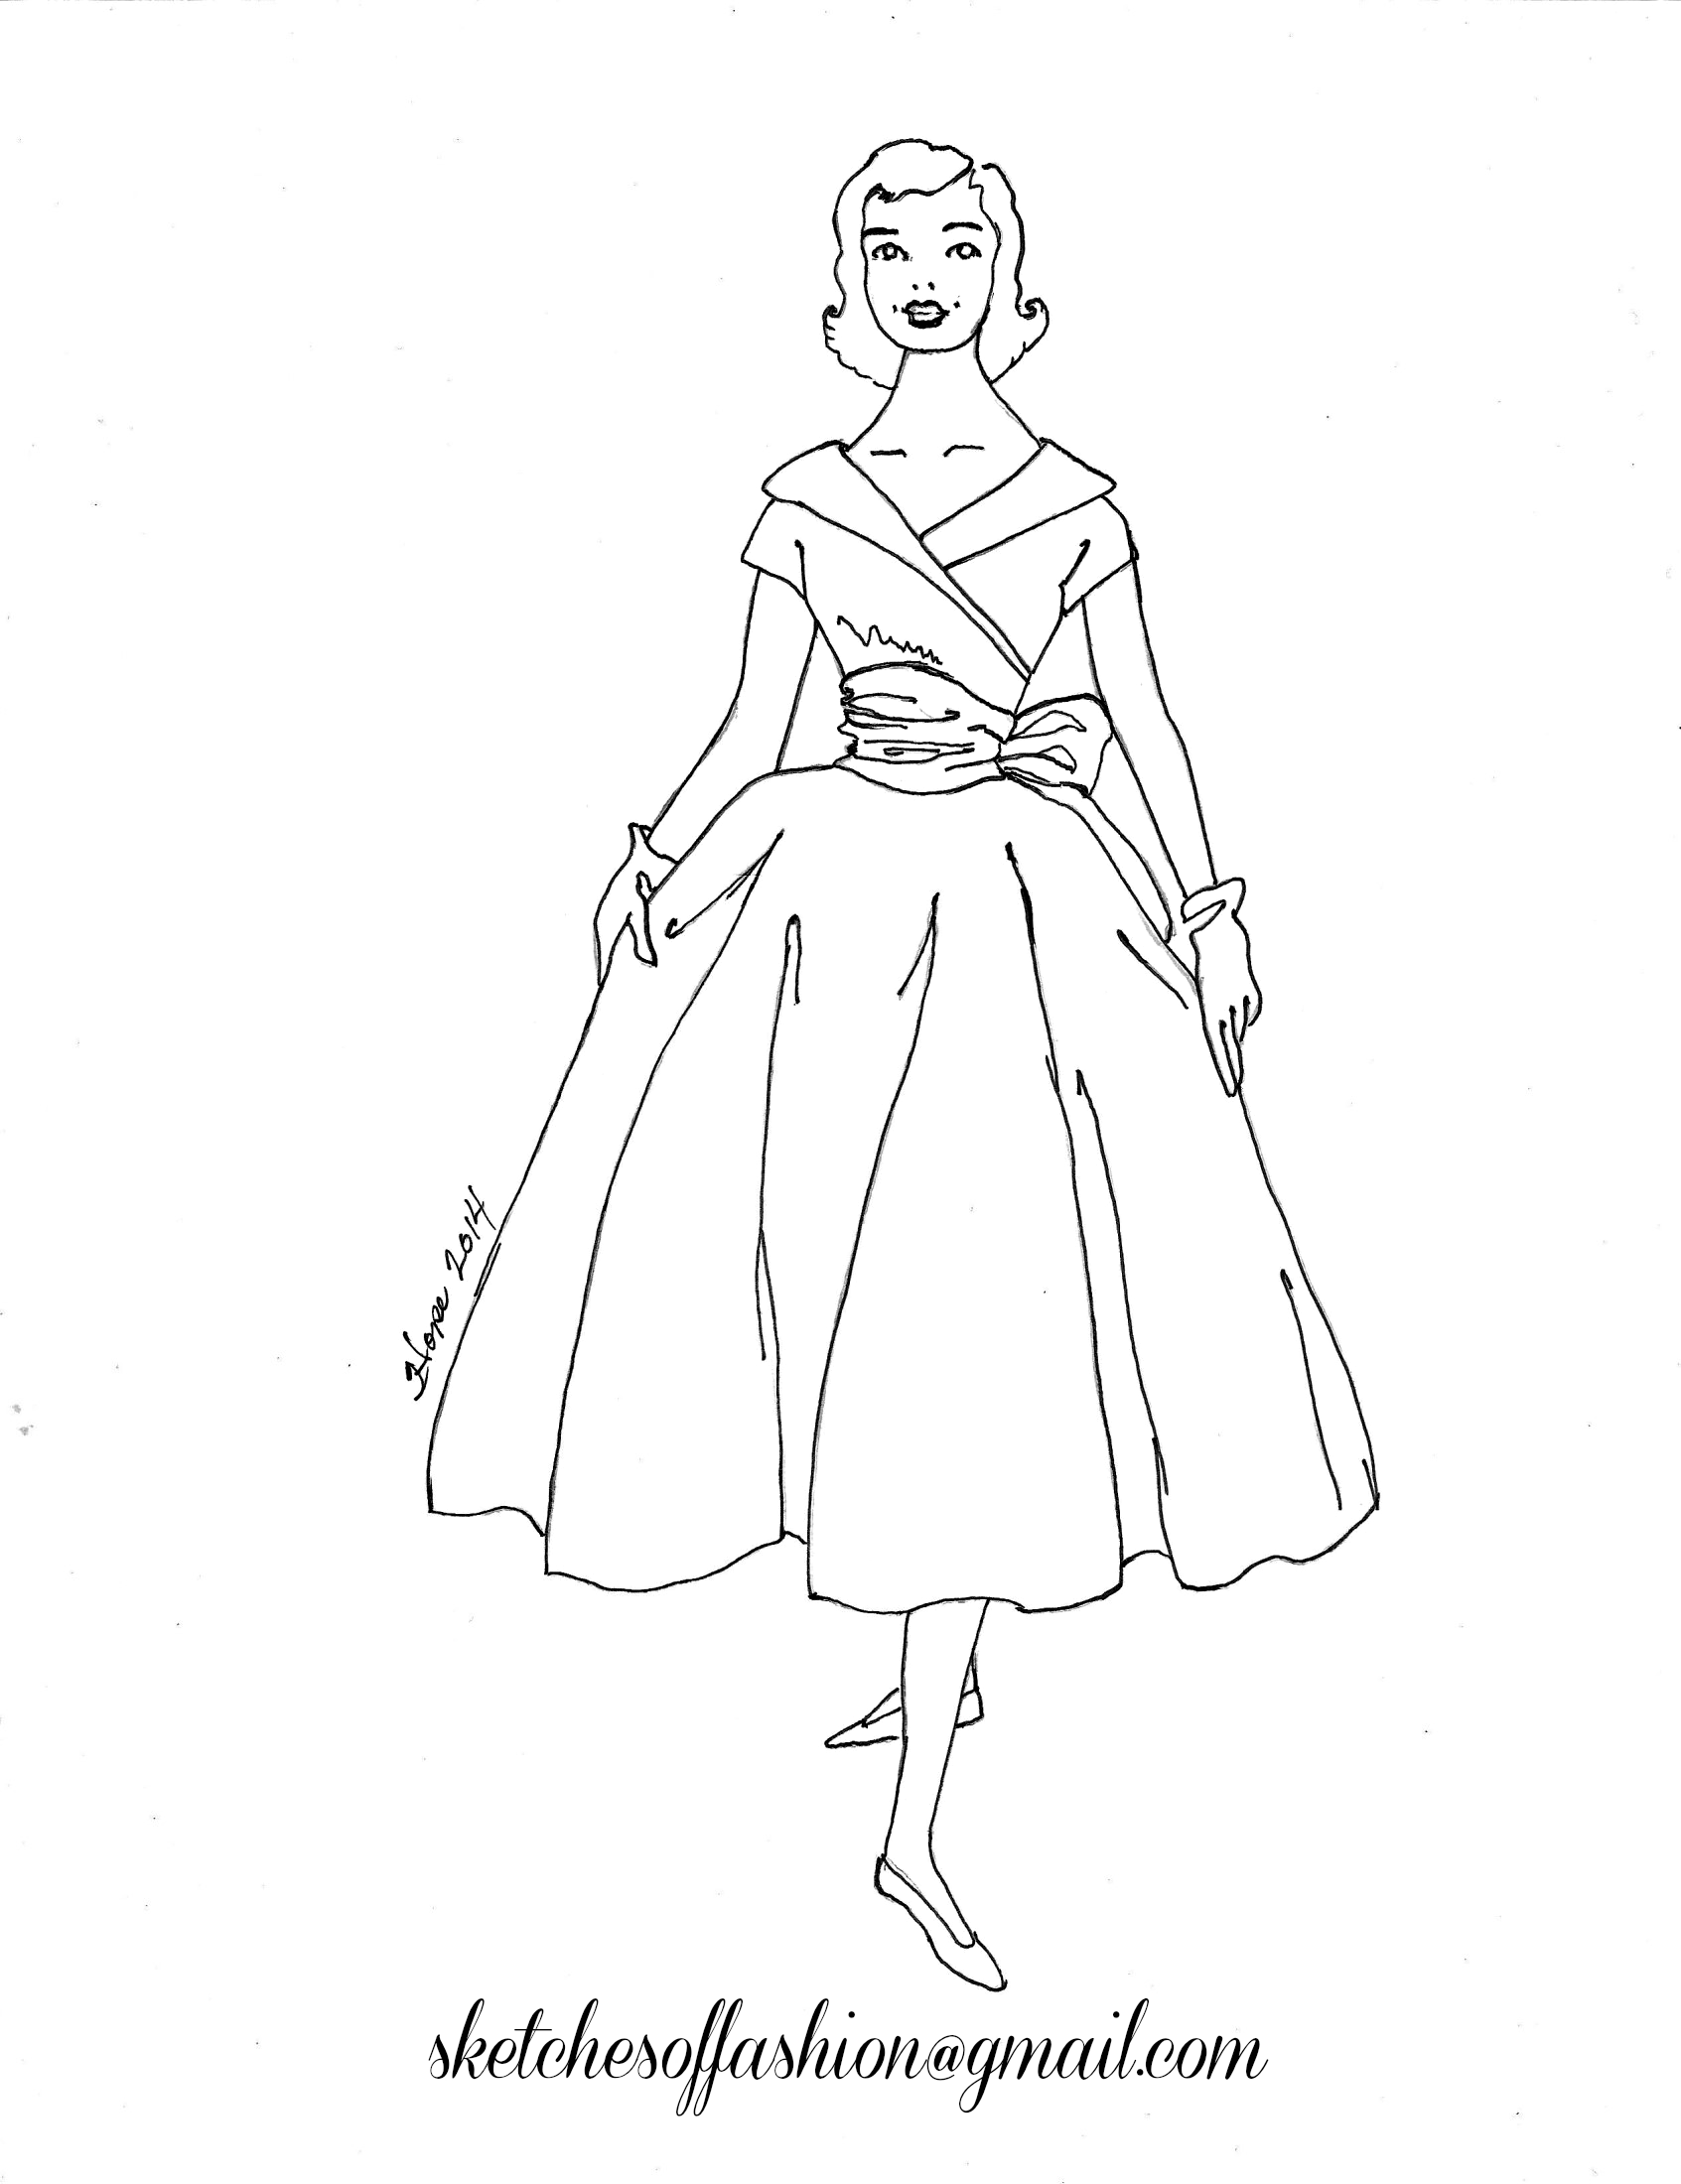 Costume Design Template Coloring Pages